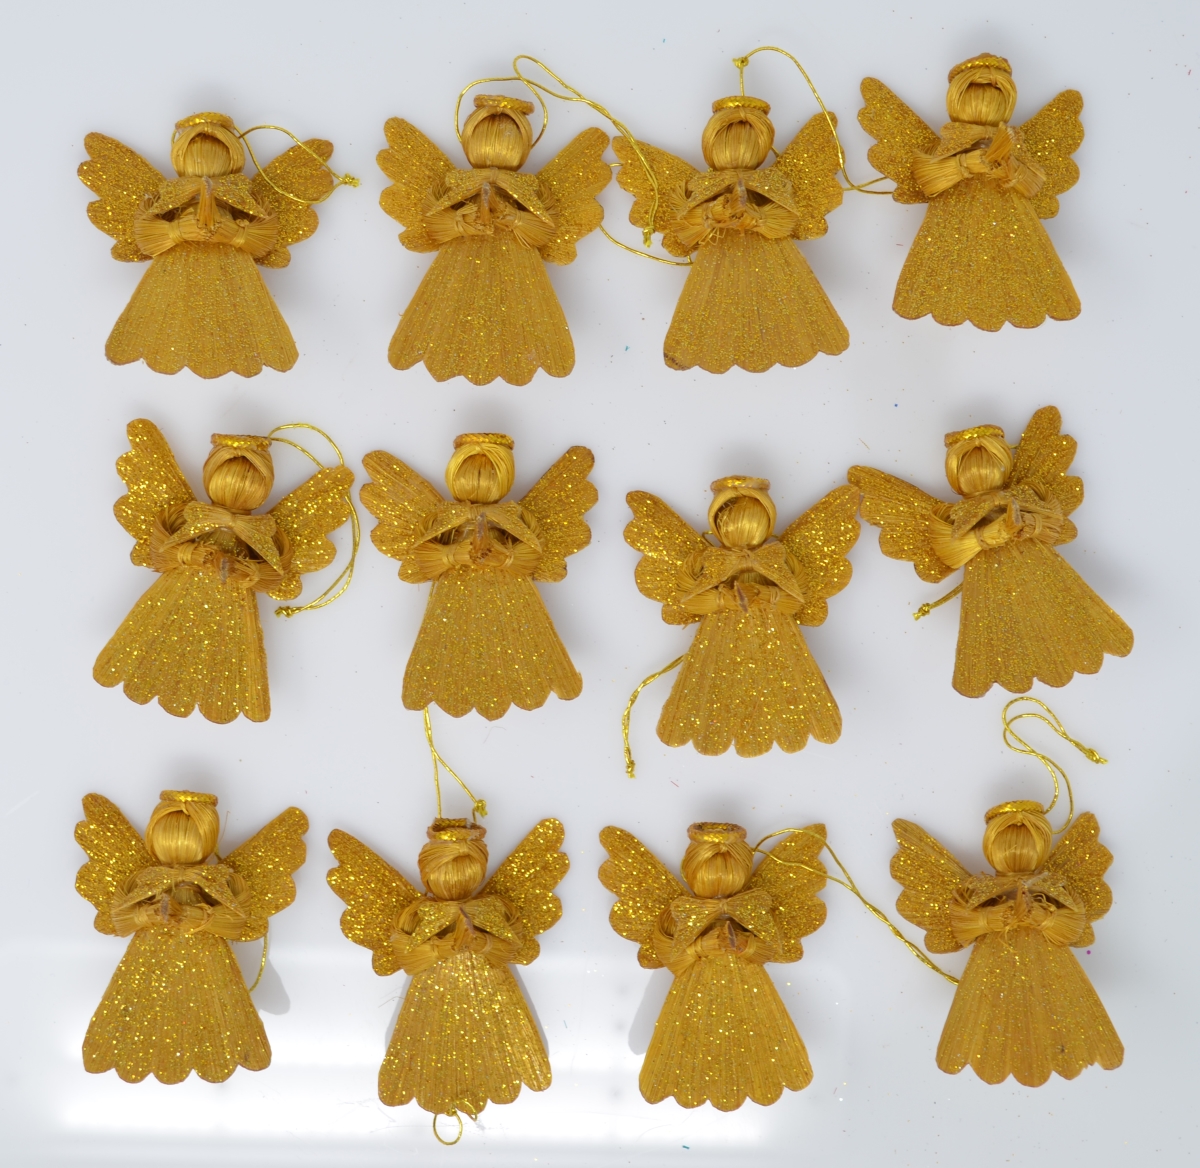 Angel0116g Argel Angel Figurines, Gold With Gold Dust - 12 Piece